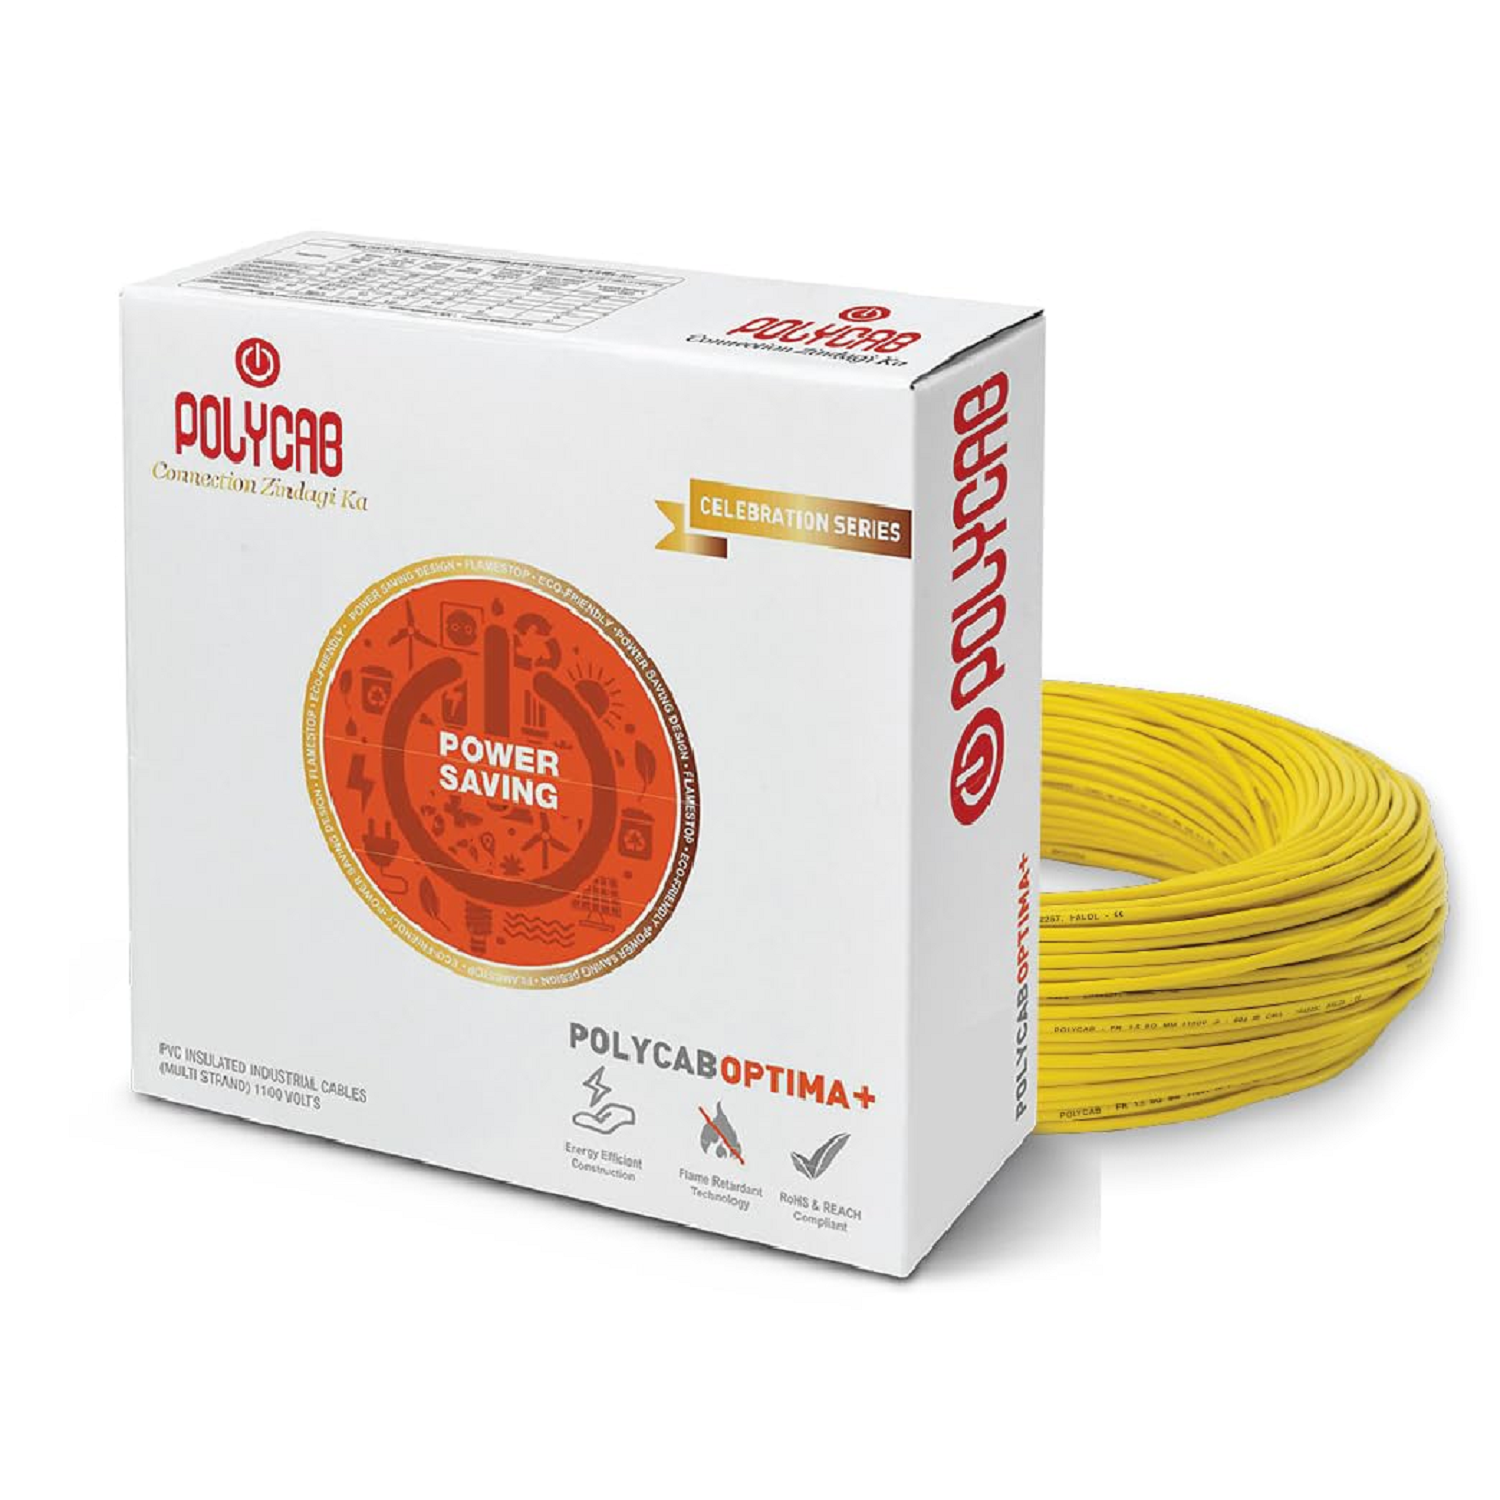 Polycab Optima Plus FR-LF 1.5 SQ-MM, 90 Meters PVC Insulated Copper Wire Single Core (Yellow)